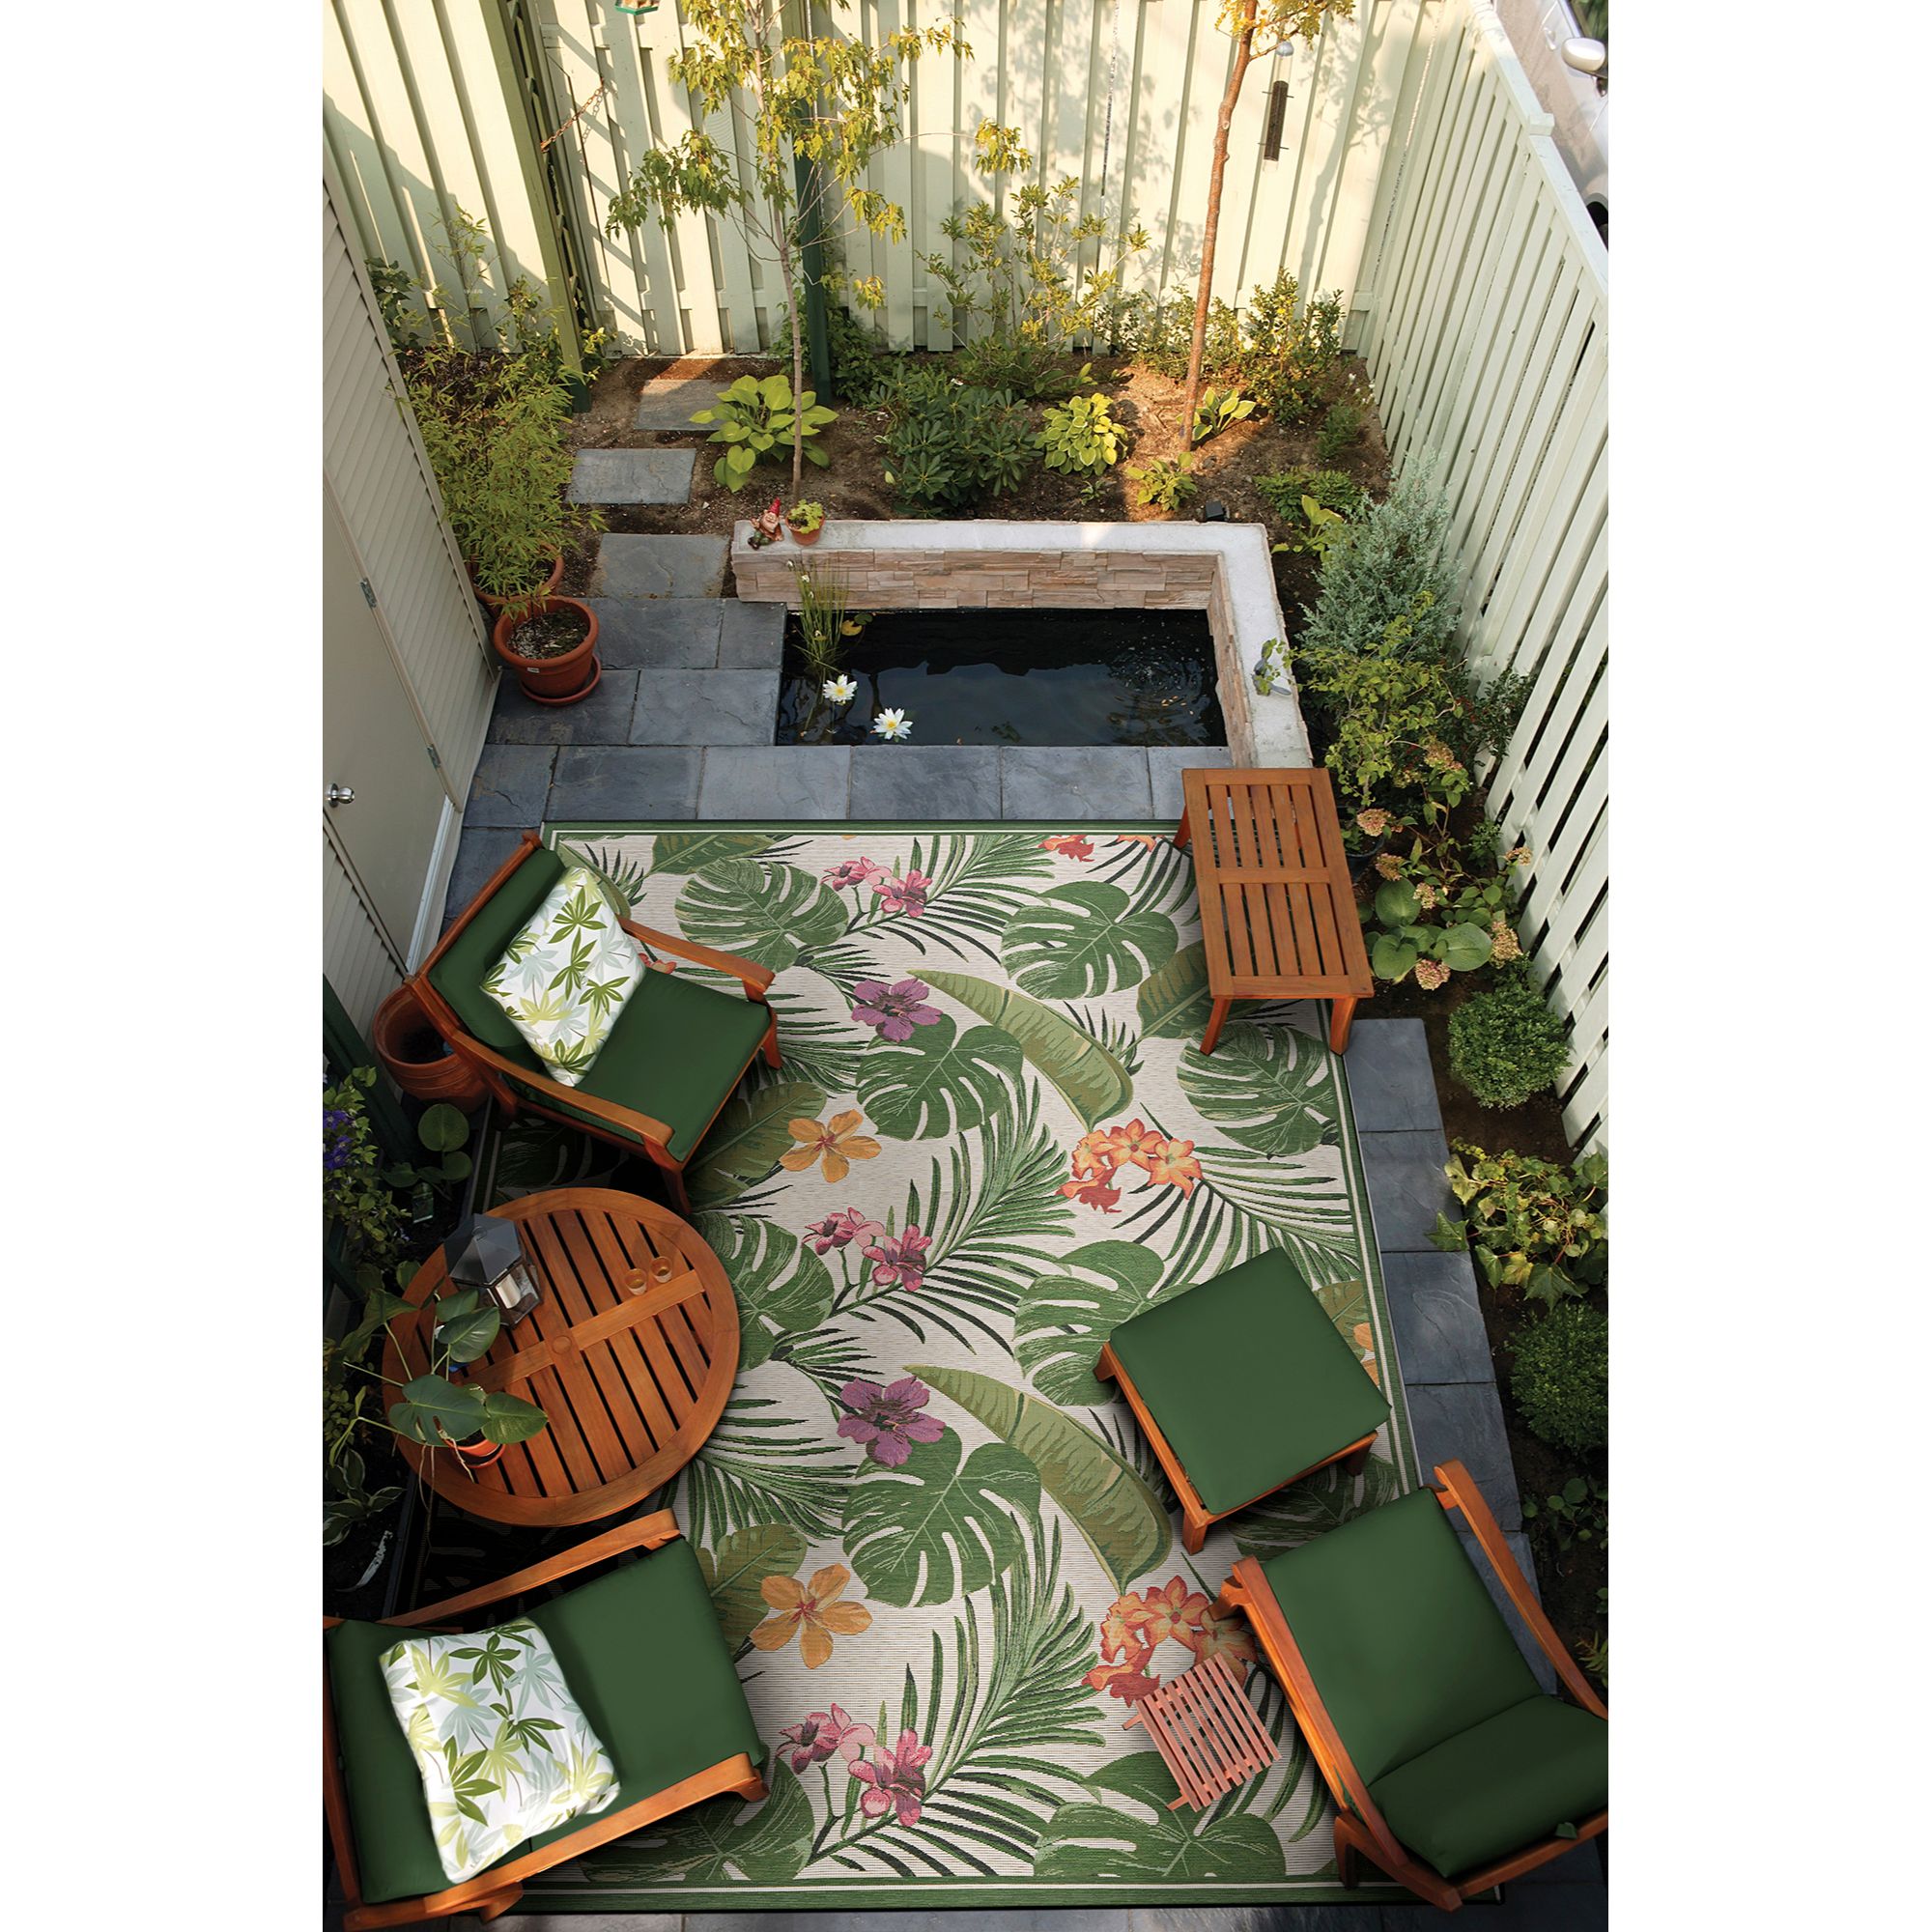 Couristan Dolce Flowering Fern Indoor / Outdoor Area Rug, Ivory-Hunter Green, 5'3" x 7'6" - image 2 of 6